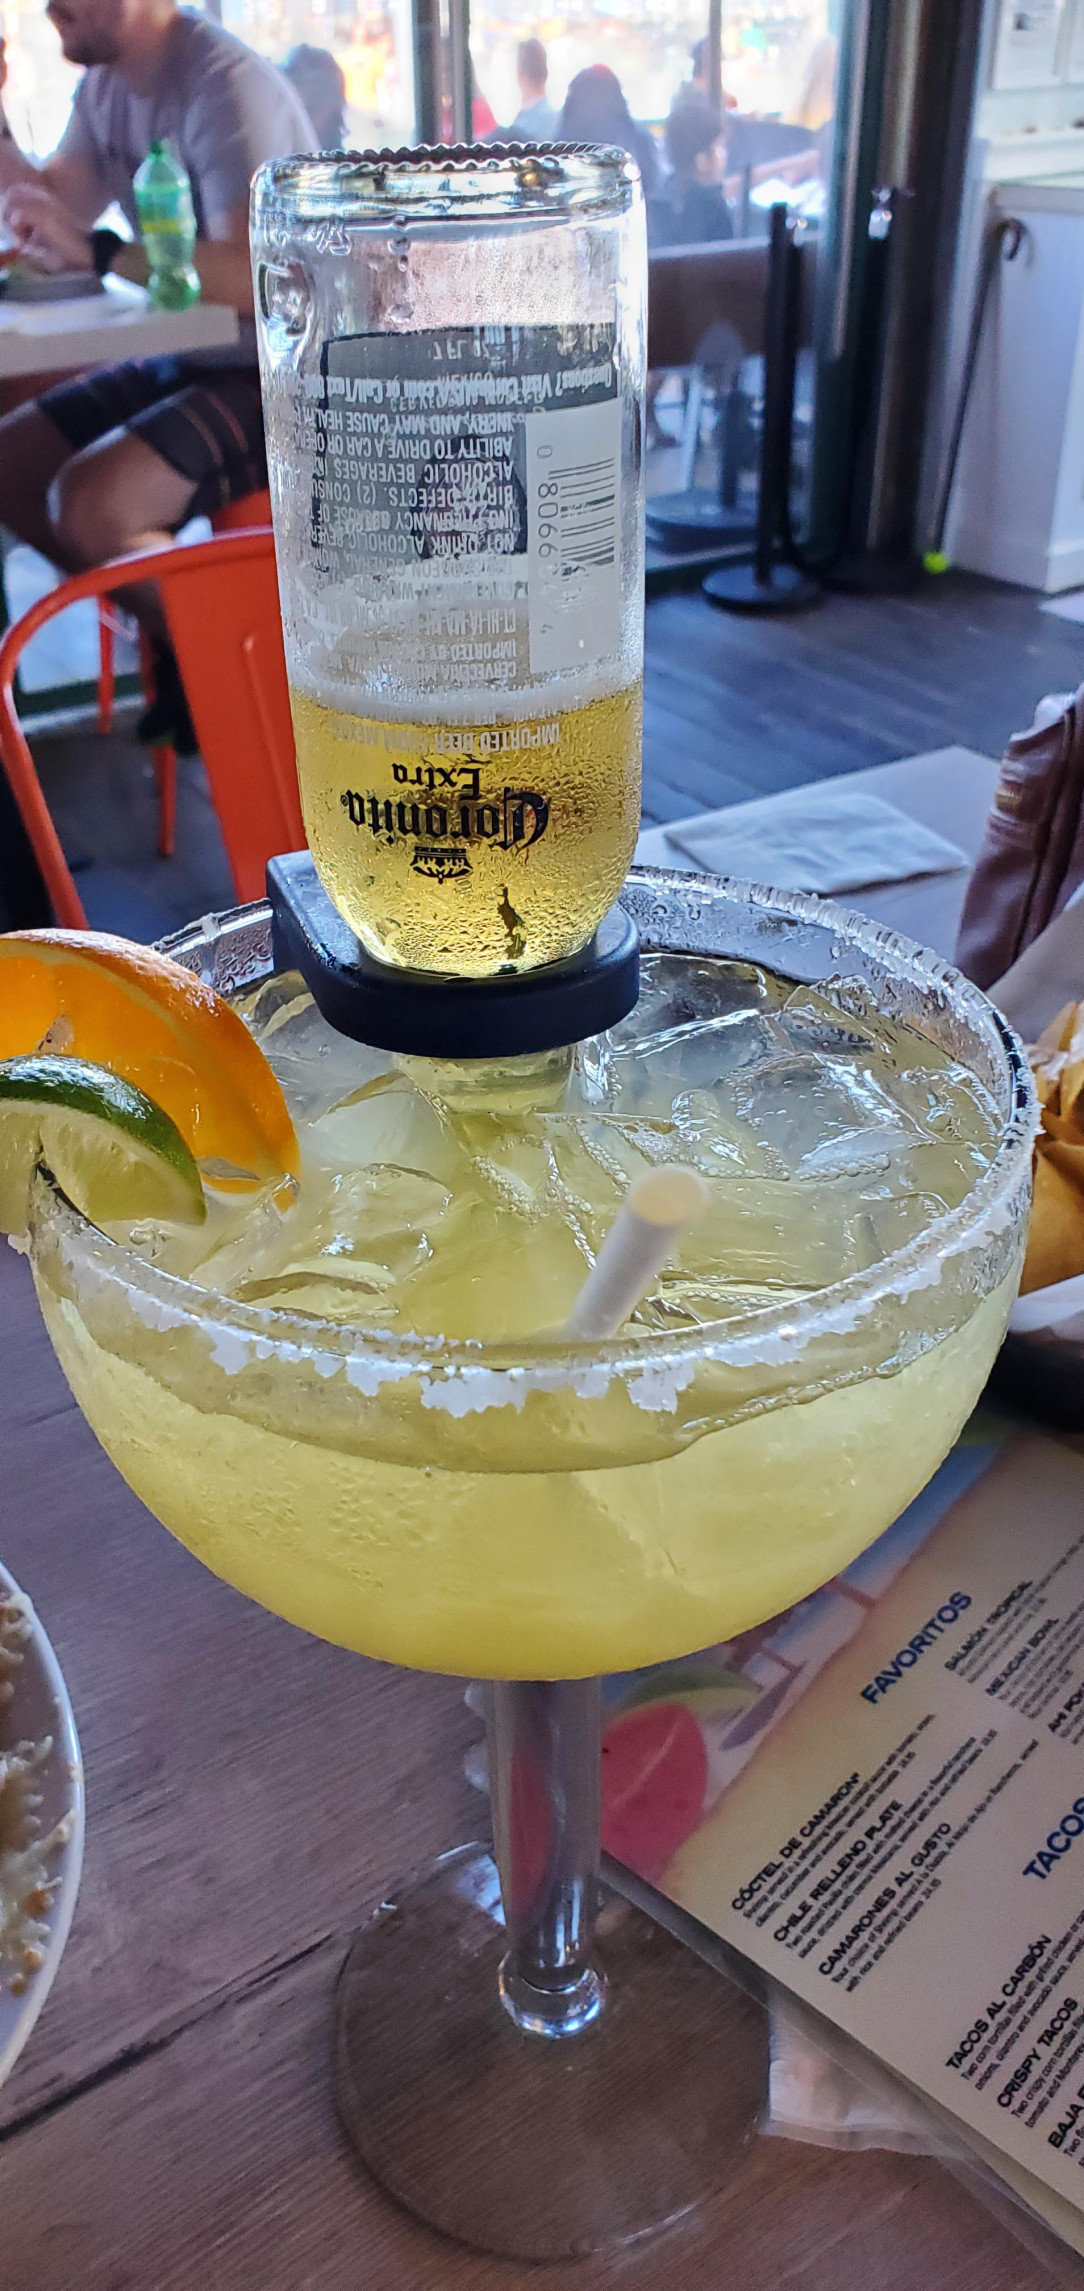 Coronarita Physics: what forces keep the beer from draining to margarita level?